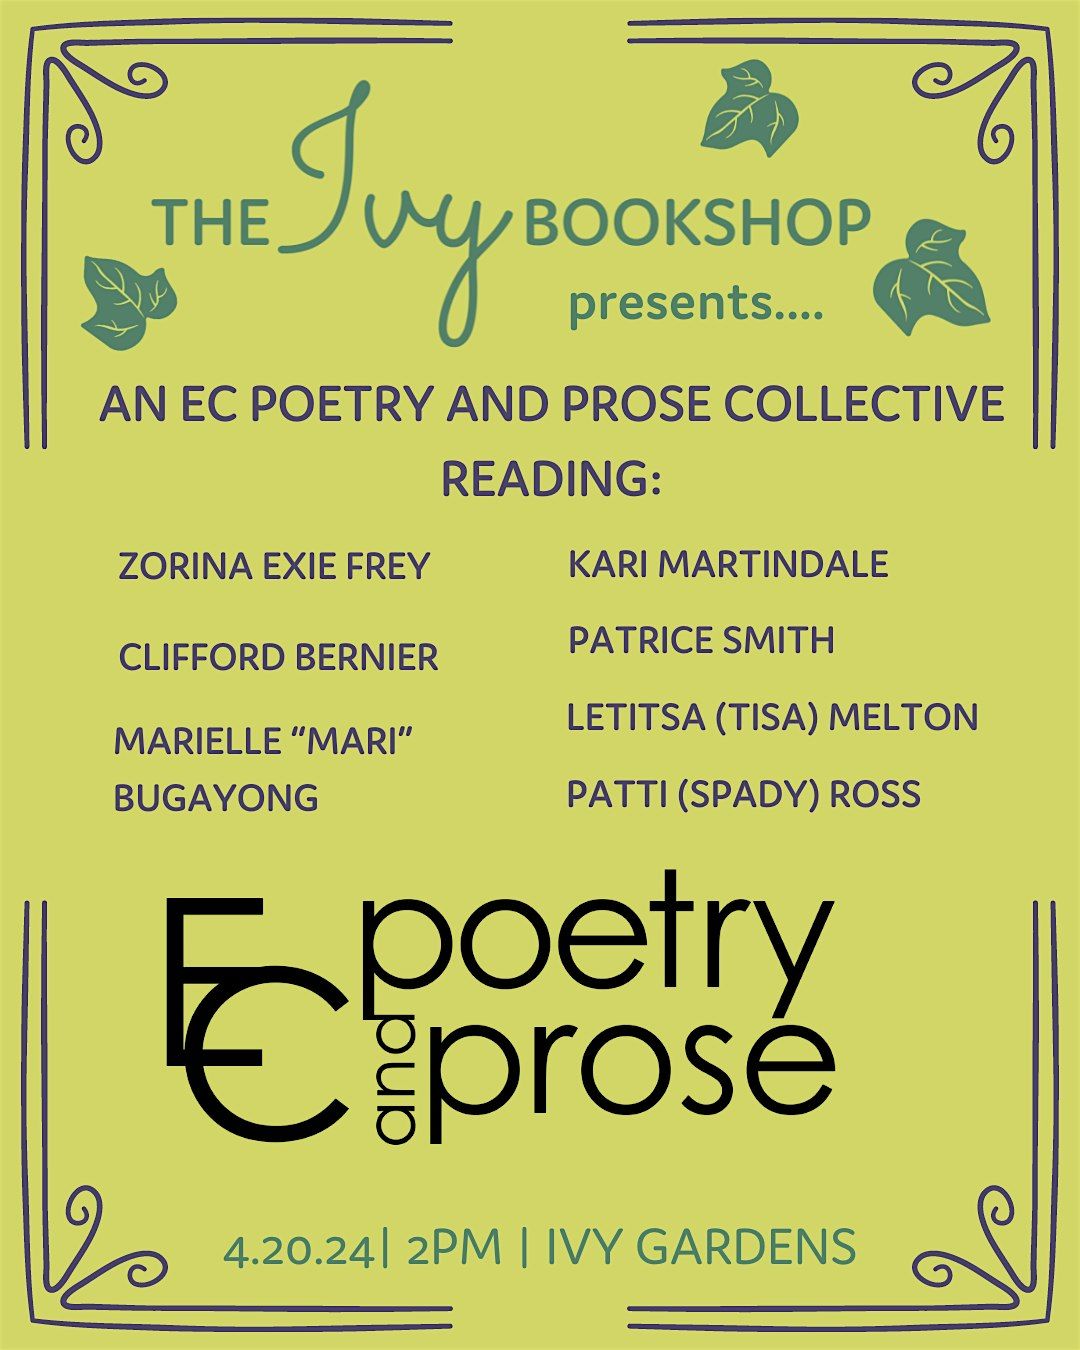 An EC Poetry and Prose Collective Reading!